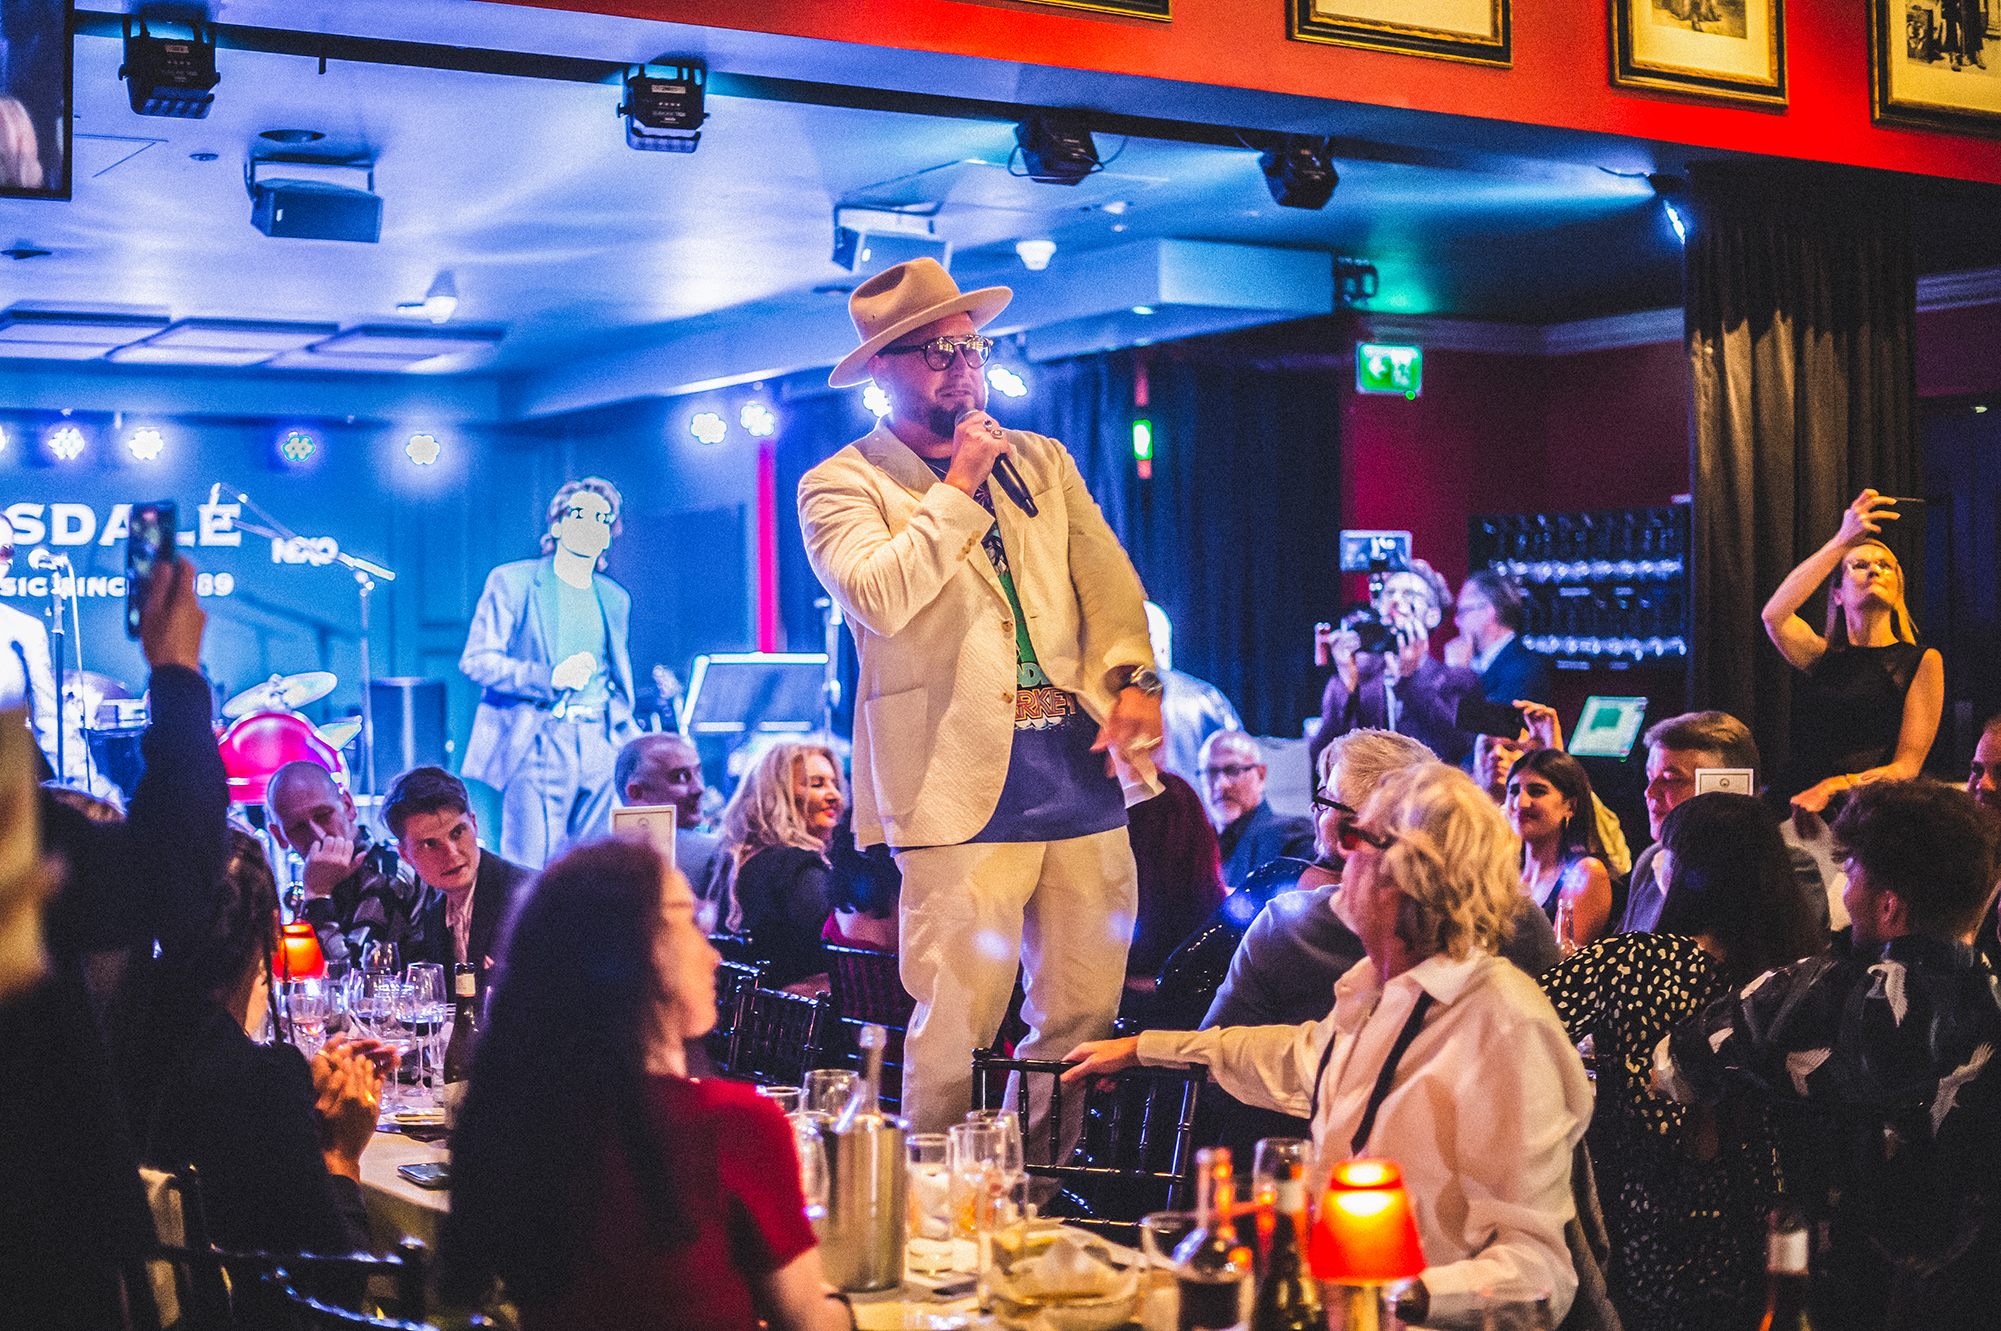 NEXO sound powers a packed Christmas and New Year calendar at Boisdale Canary Wharf